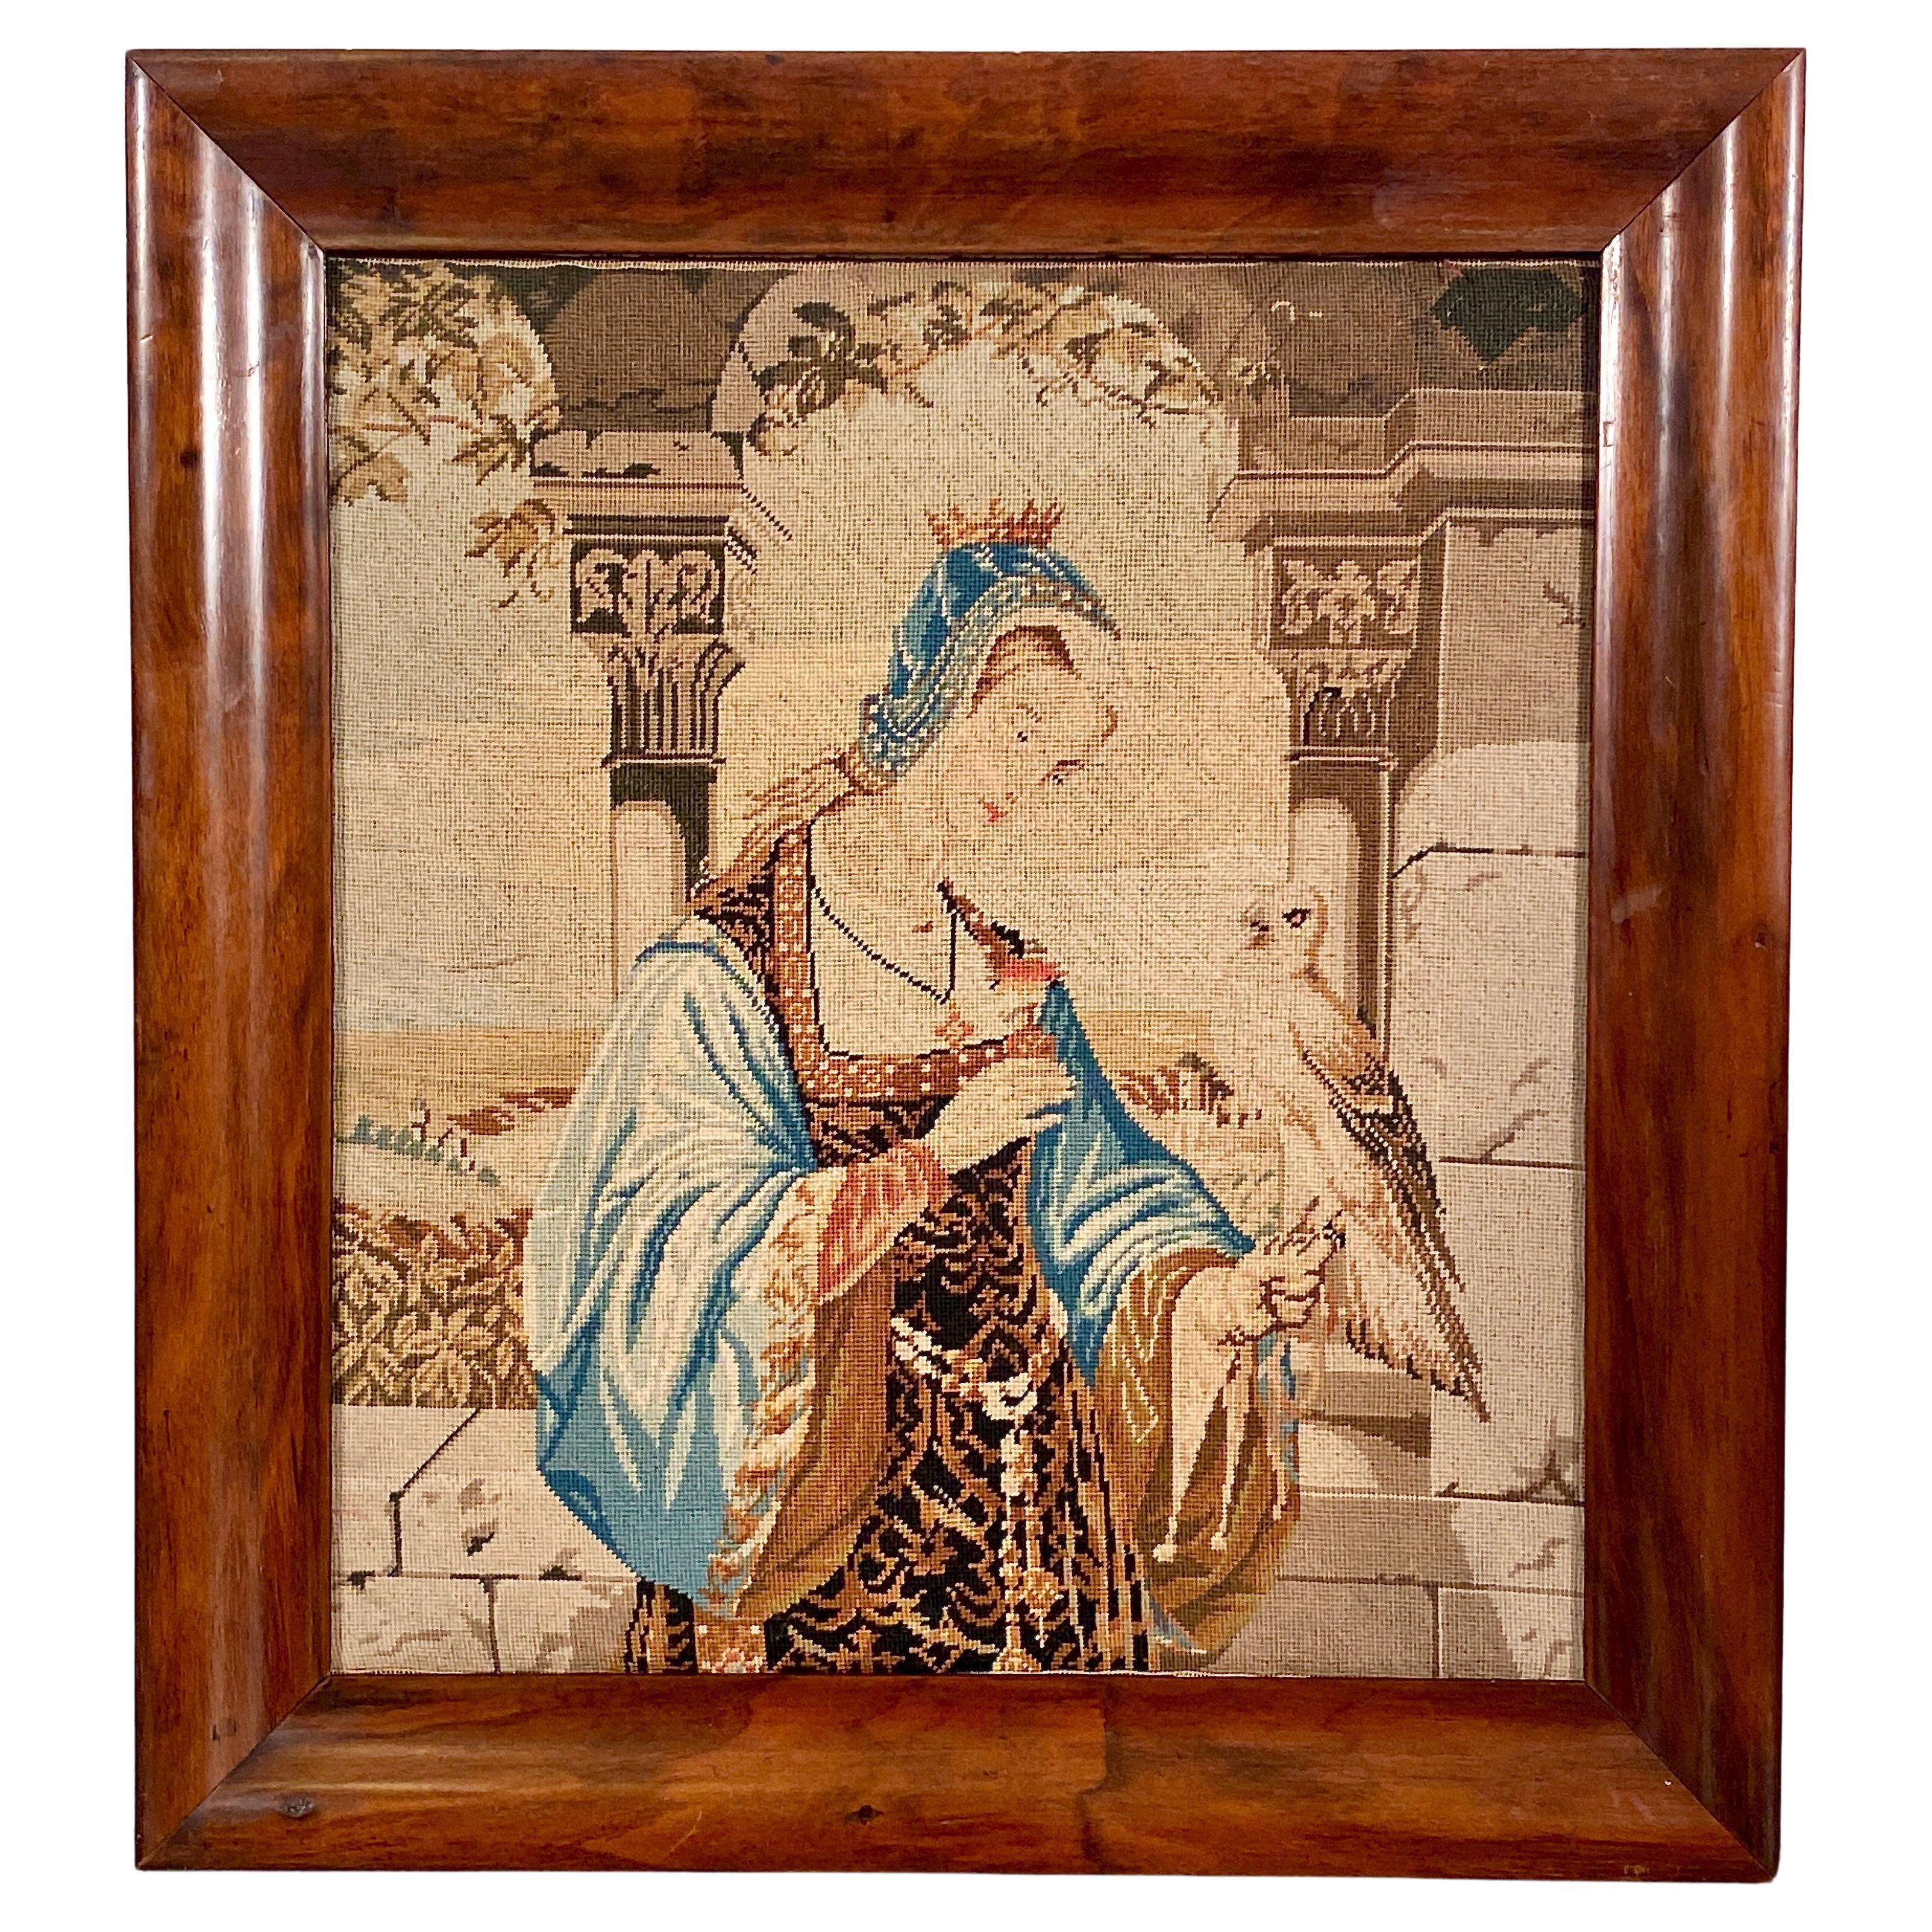 Hunting Falconry Embroidered Tapestry Classical Female Portrait Wool, circa 1890